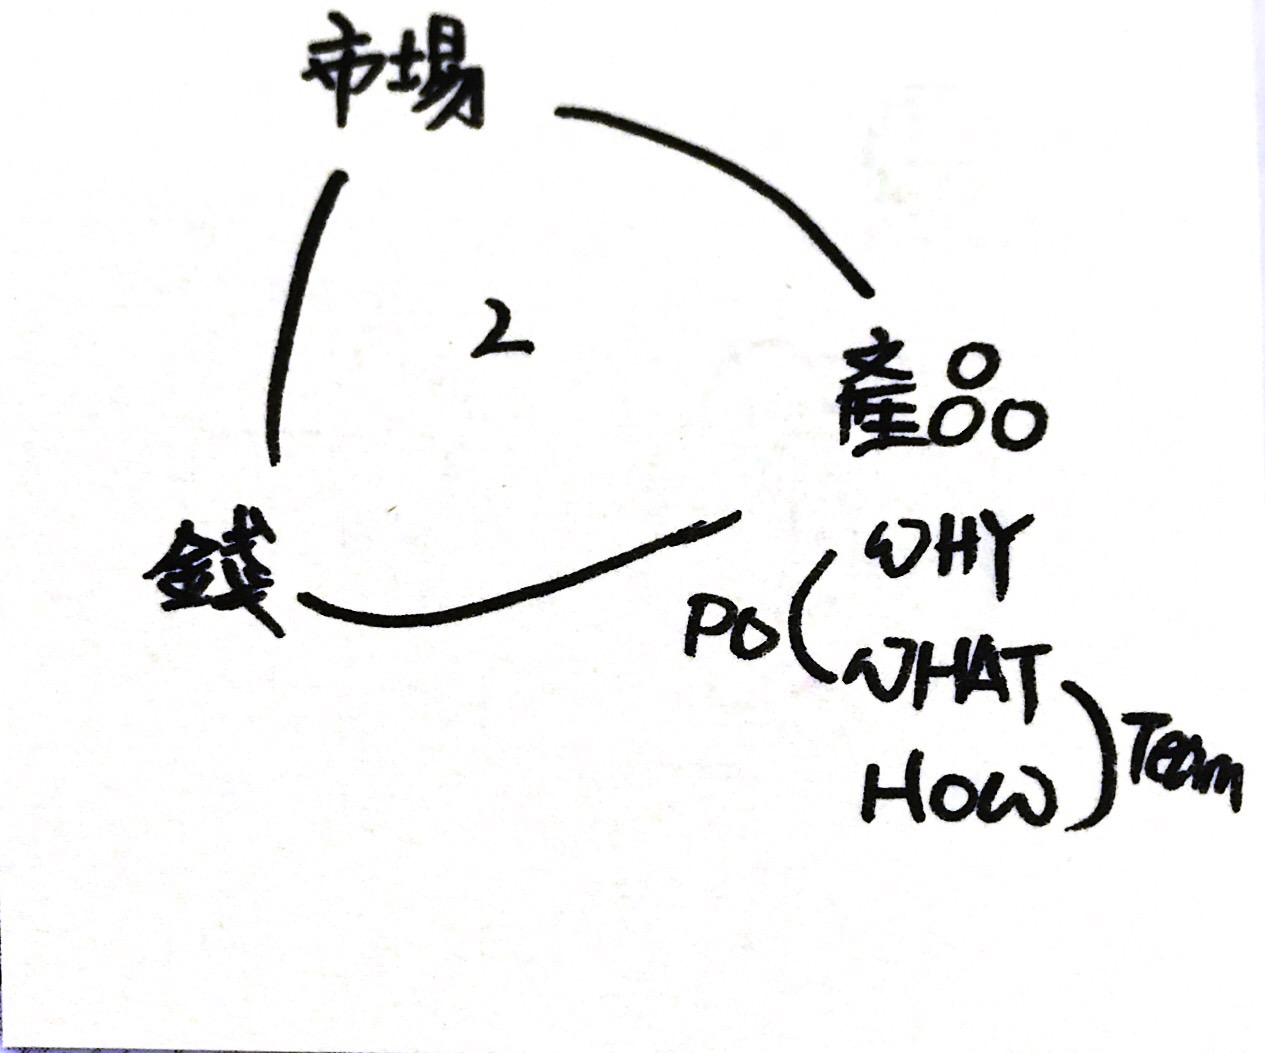 PO 觀注 WHY & WHAT ；Team 觀注 WHAT & HOW